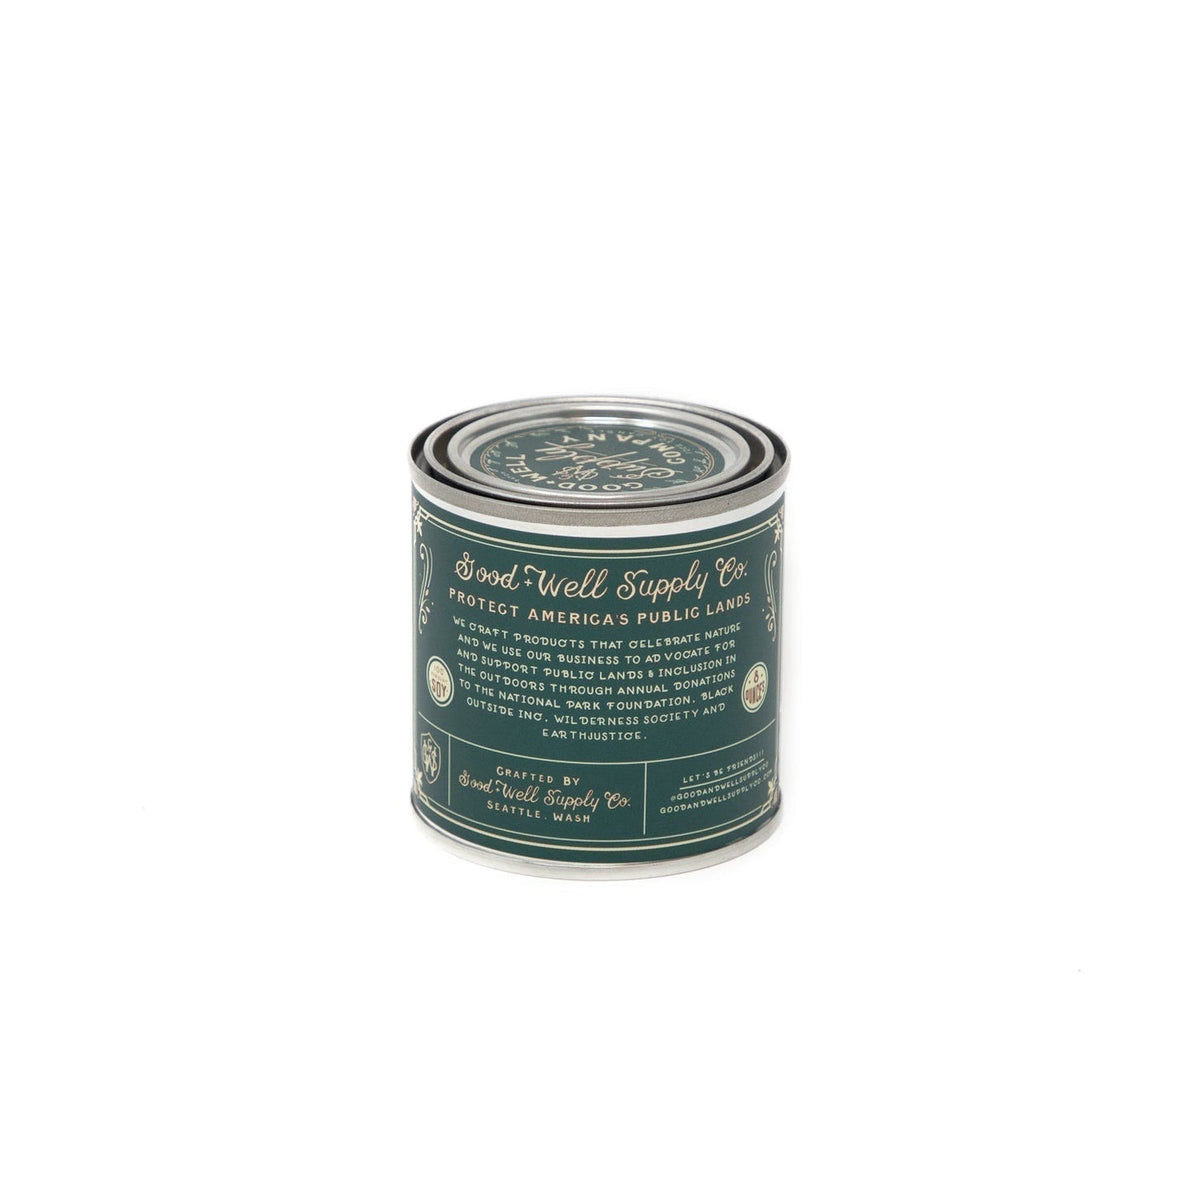 A green tin with a label on it, containing the Appalachian Trail Candle from A Good &amp; Well Supply Co.